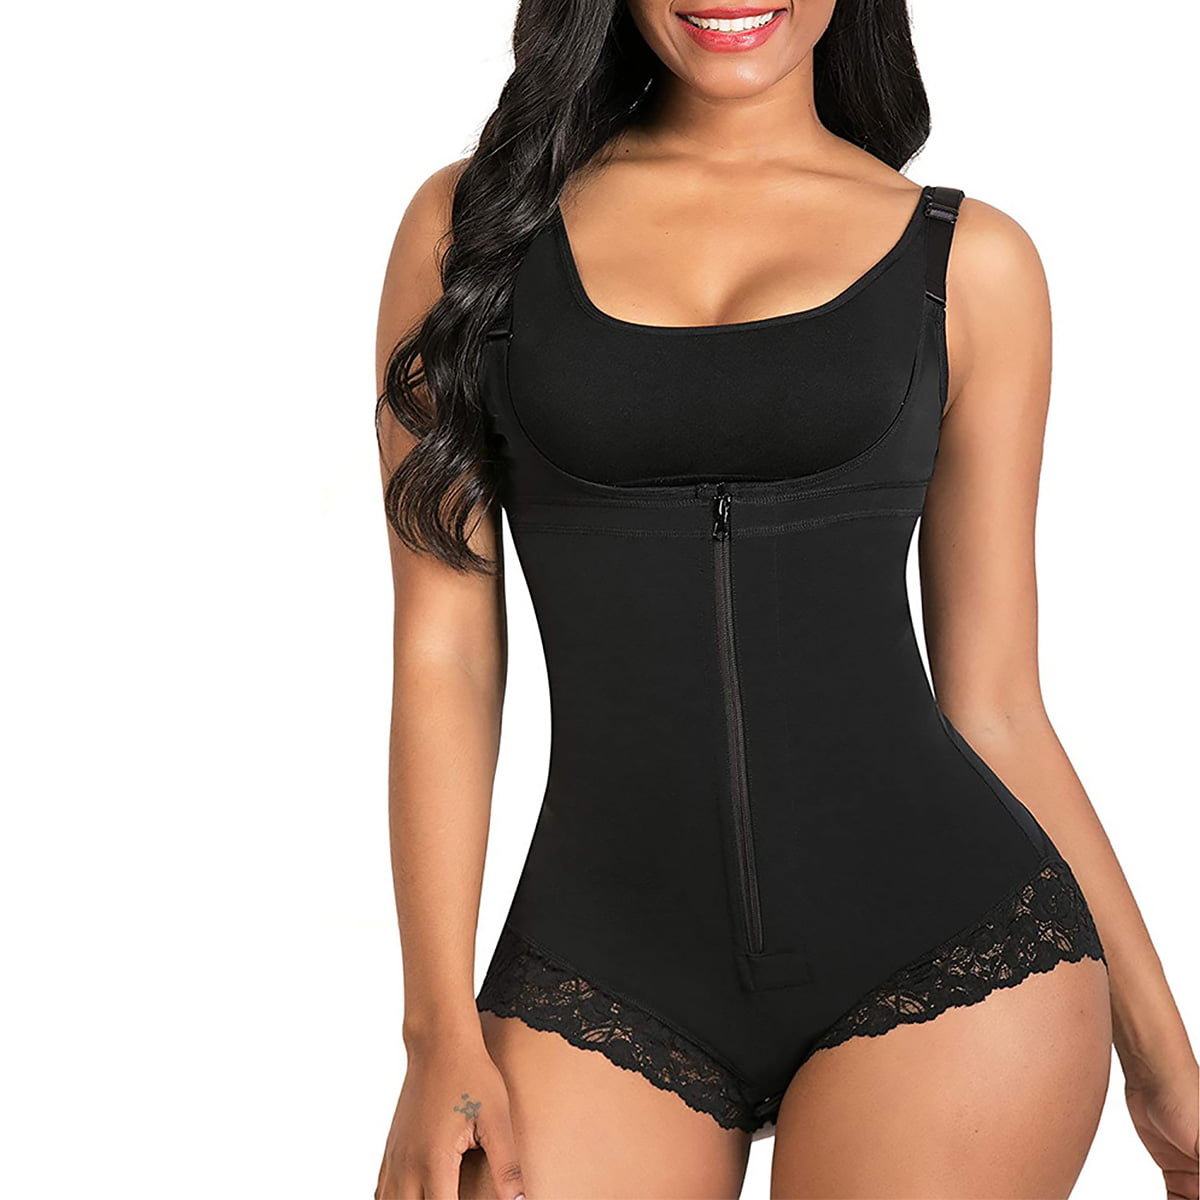 Details about   Fajas Colombianas Reductoras Levanta Cola Post Surgery Body Shaper Tummy Thigh 